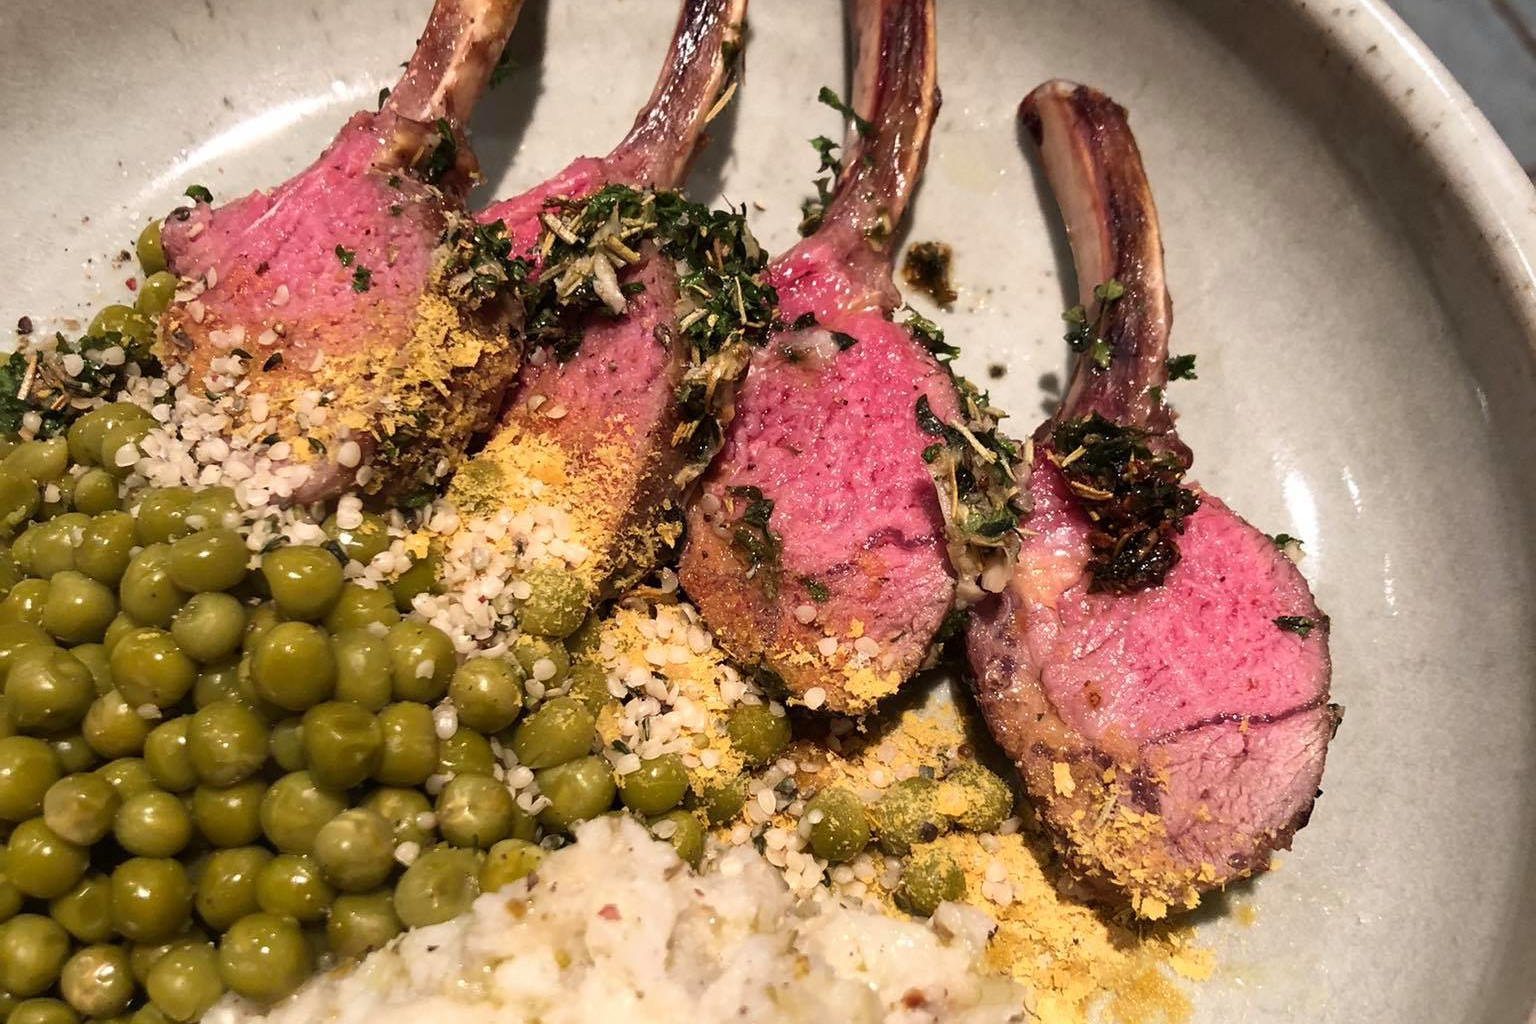 Lamb rack served with peas and mashed potato